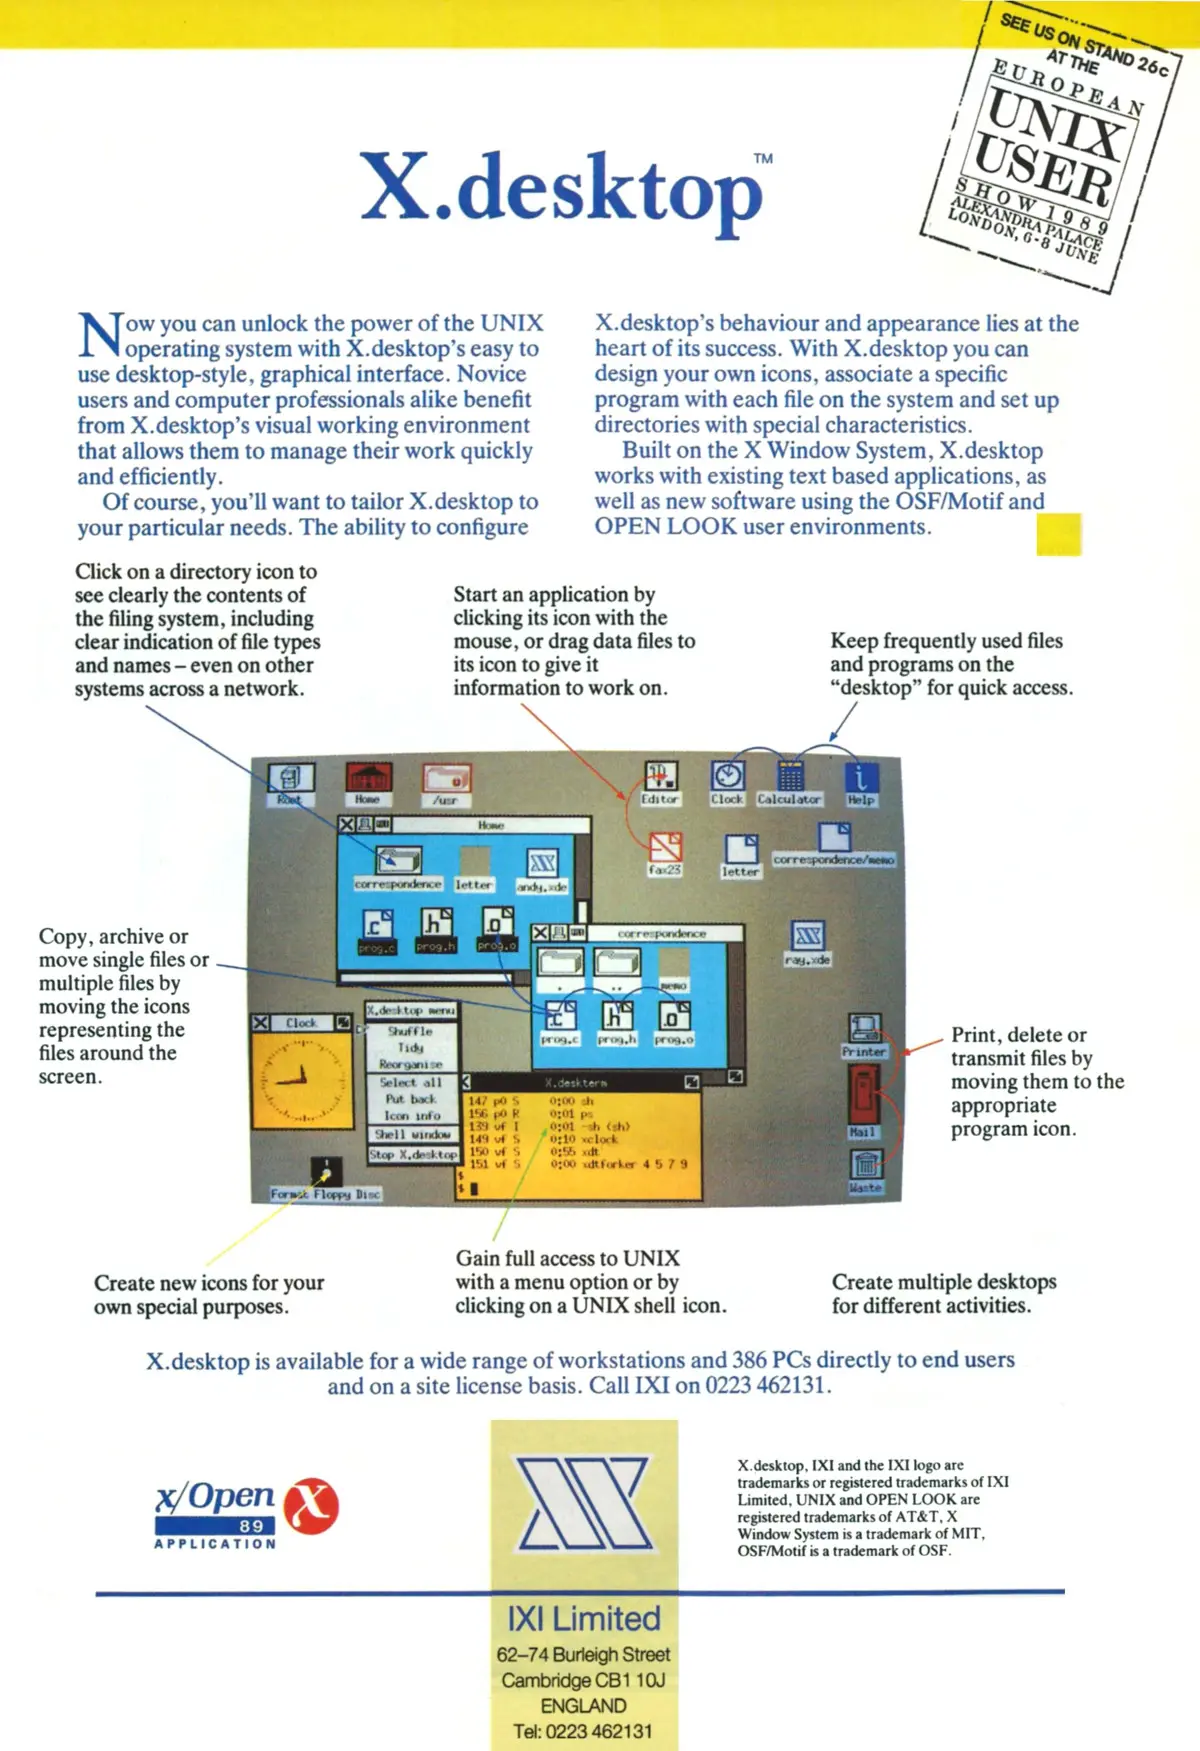 A rare consumer advert for IXI's X.desktop, which featured in the June 1989 edition of Personal Computer World. It shows the Mac-like environment - albeit in colour rather than the Mac's monochrome - and mentions support for both OSF/Motif and Open Look. The advert also shows that Unix had apparently become big enough to warrant a trade show, in the shape of the European Unix User show at Alexandra Palace in London, on the 6th to the 8th of June 1989.